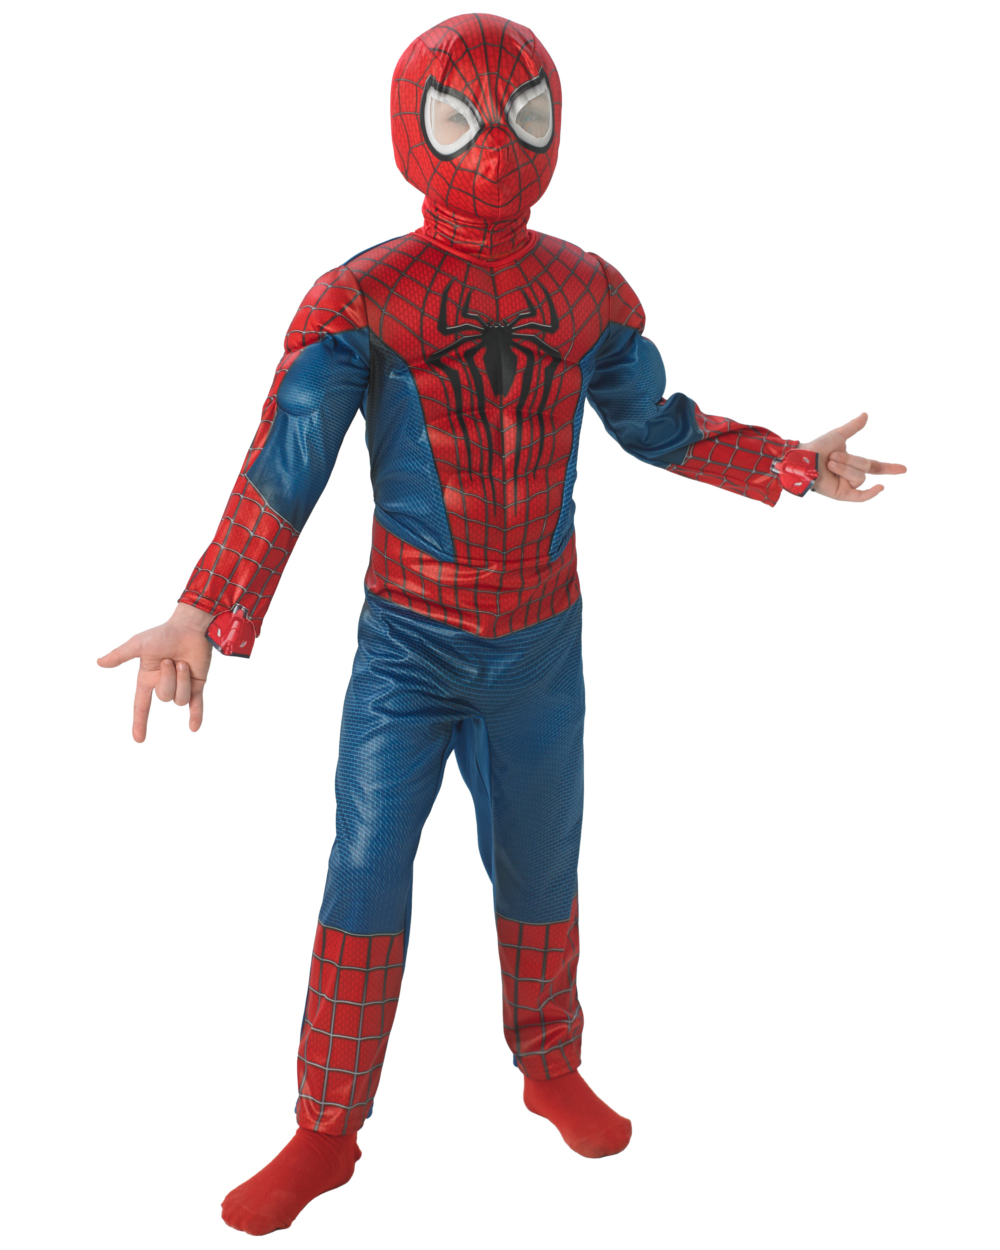 Rubie's Deluxe Spider-Man Boy's Halloween Fancy-Dress Costume for Child, M - image 2 of 2